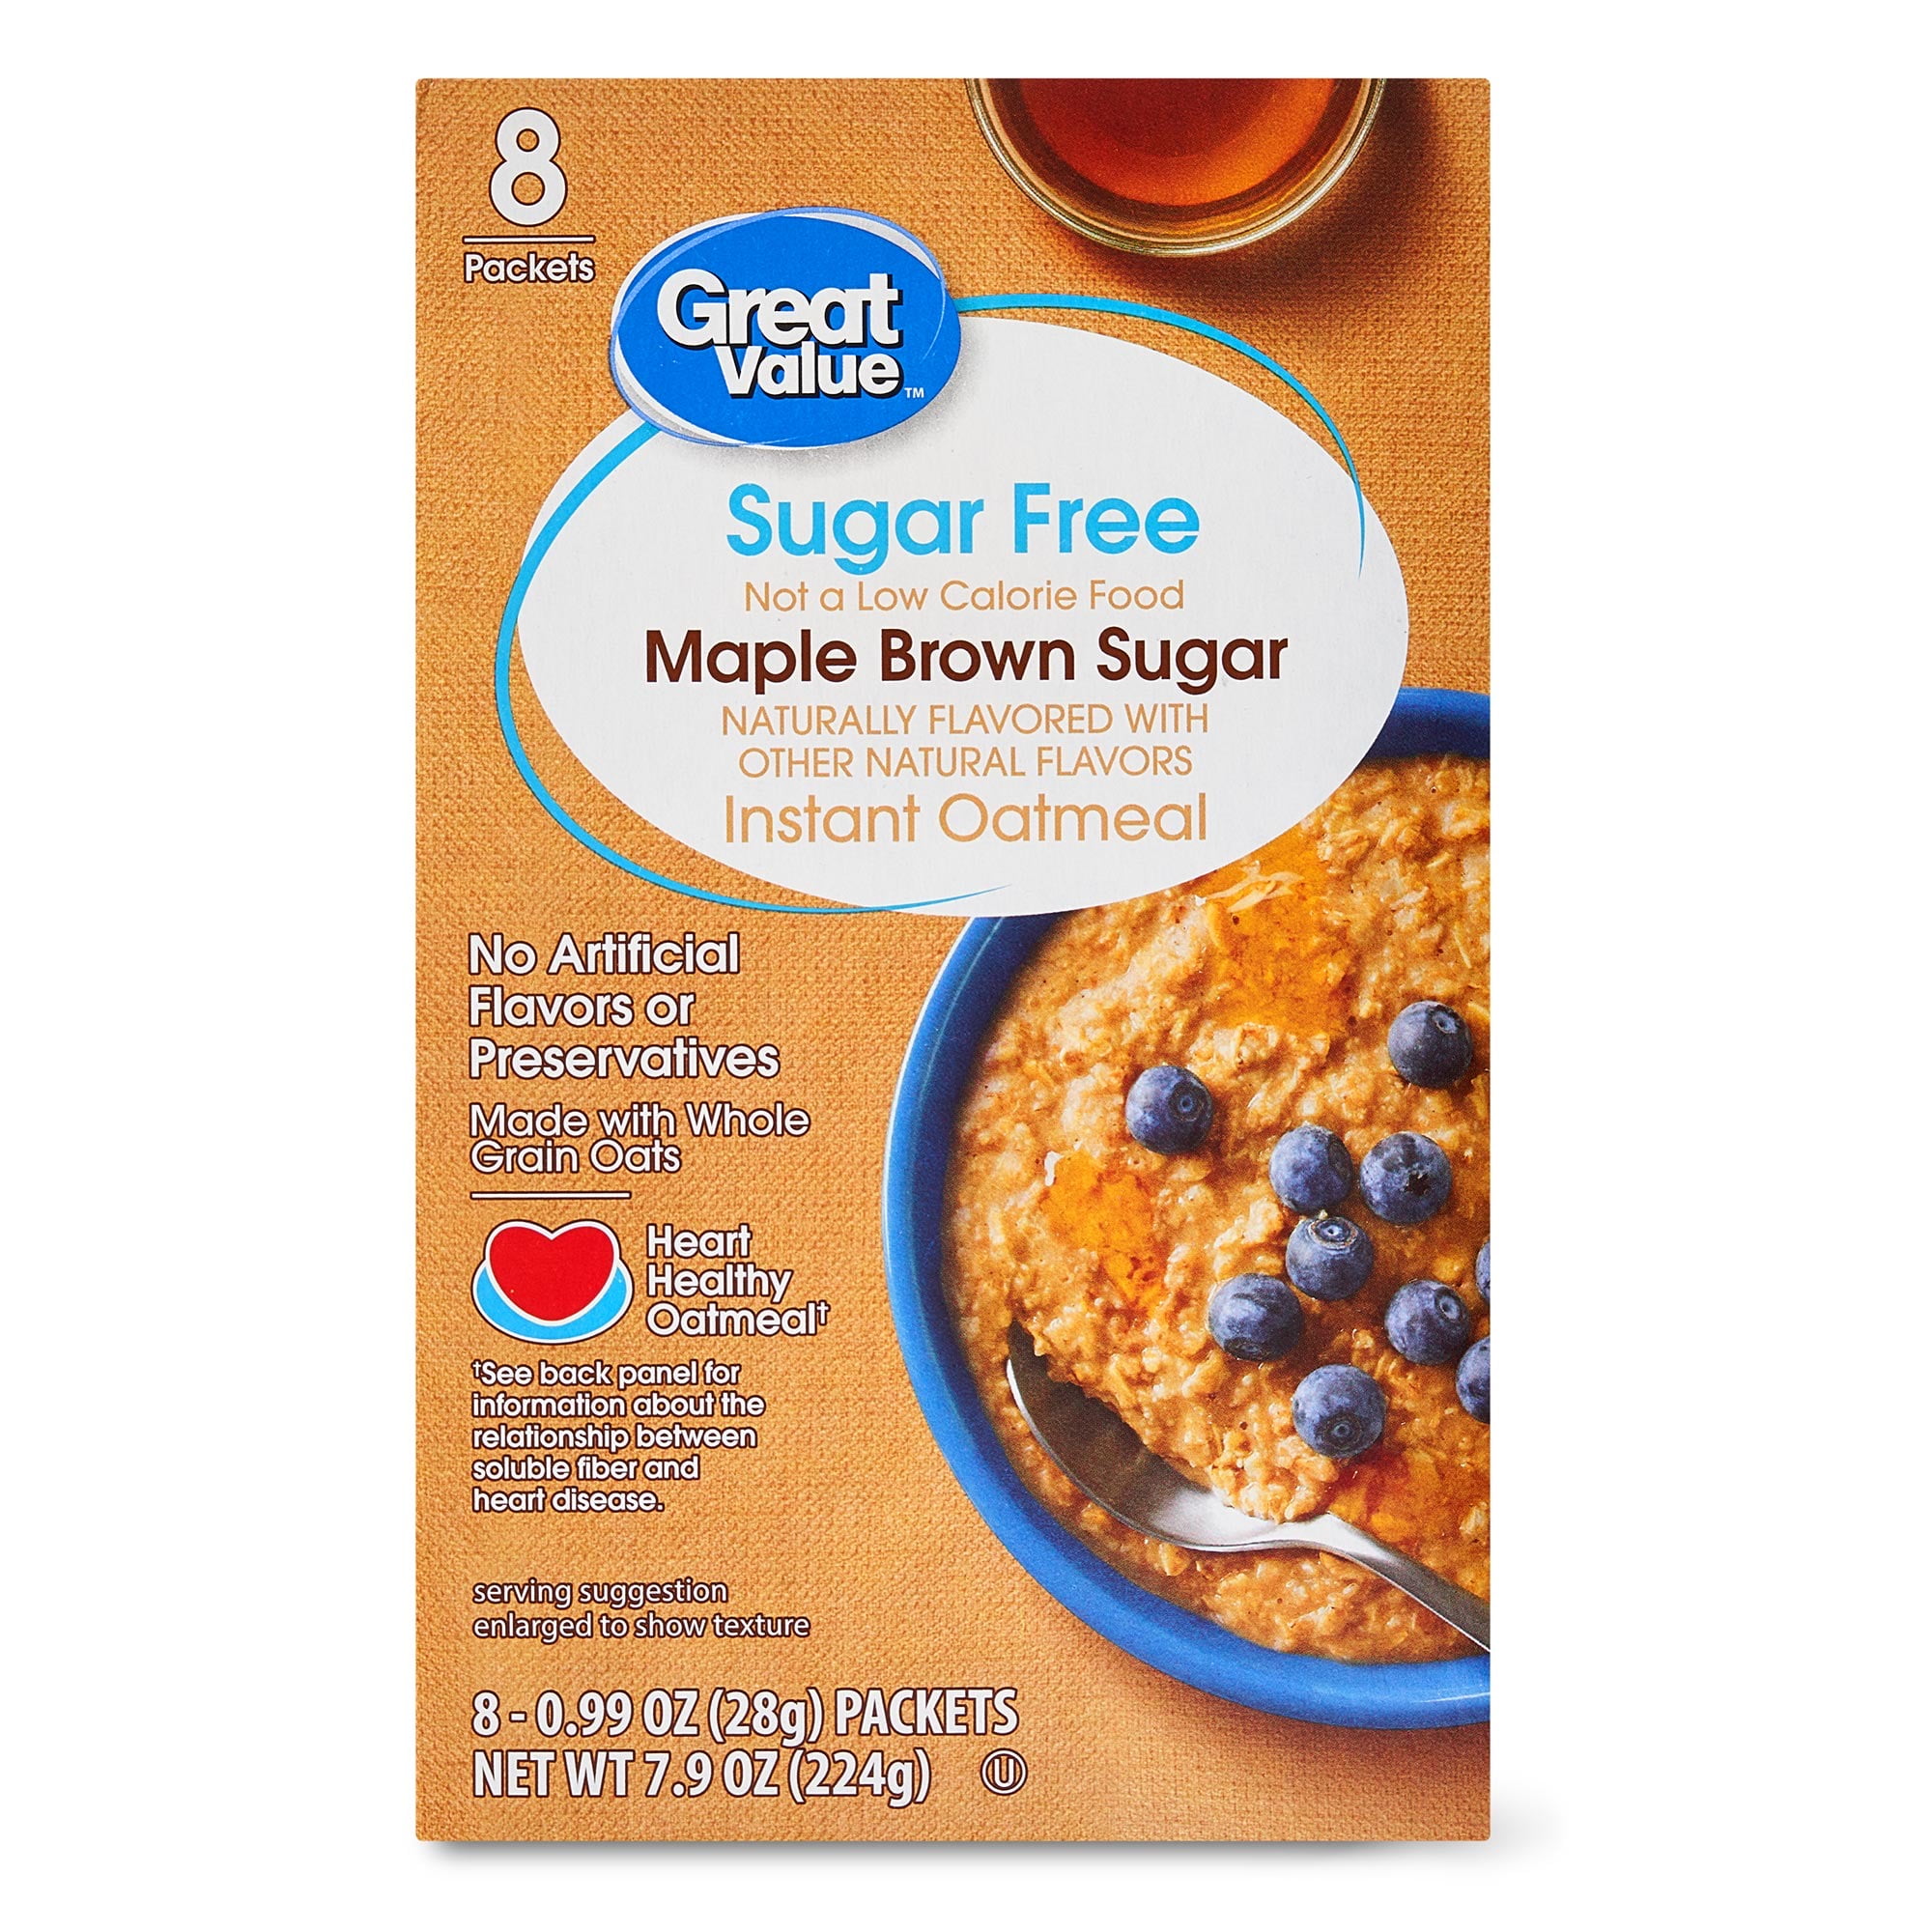 Save on Oats Overnight Shake Maple Brown Sugar Order Online Delivery